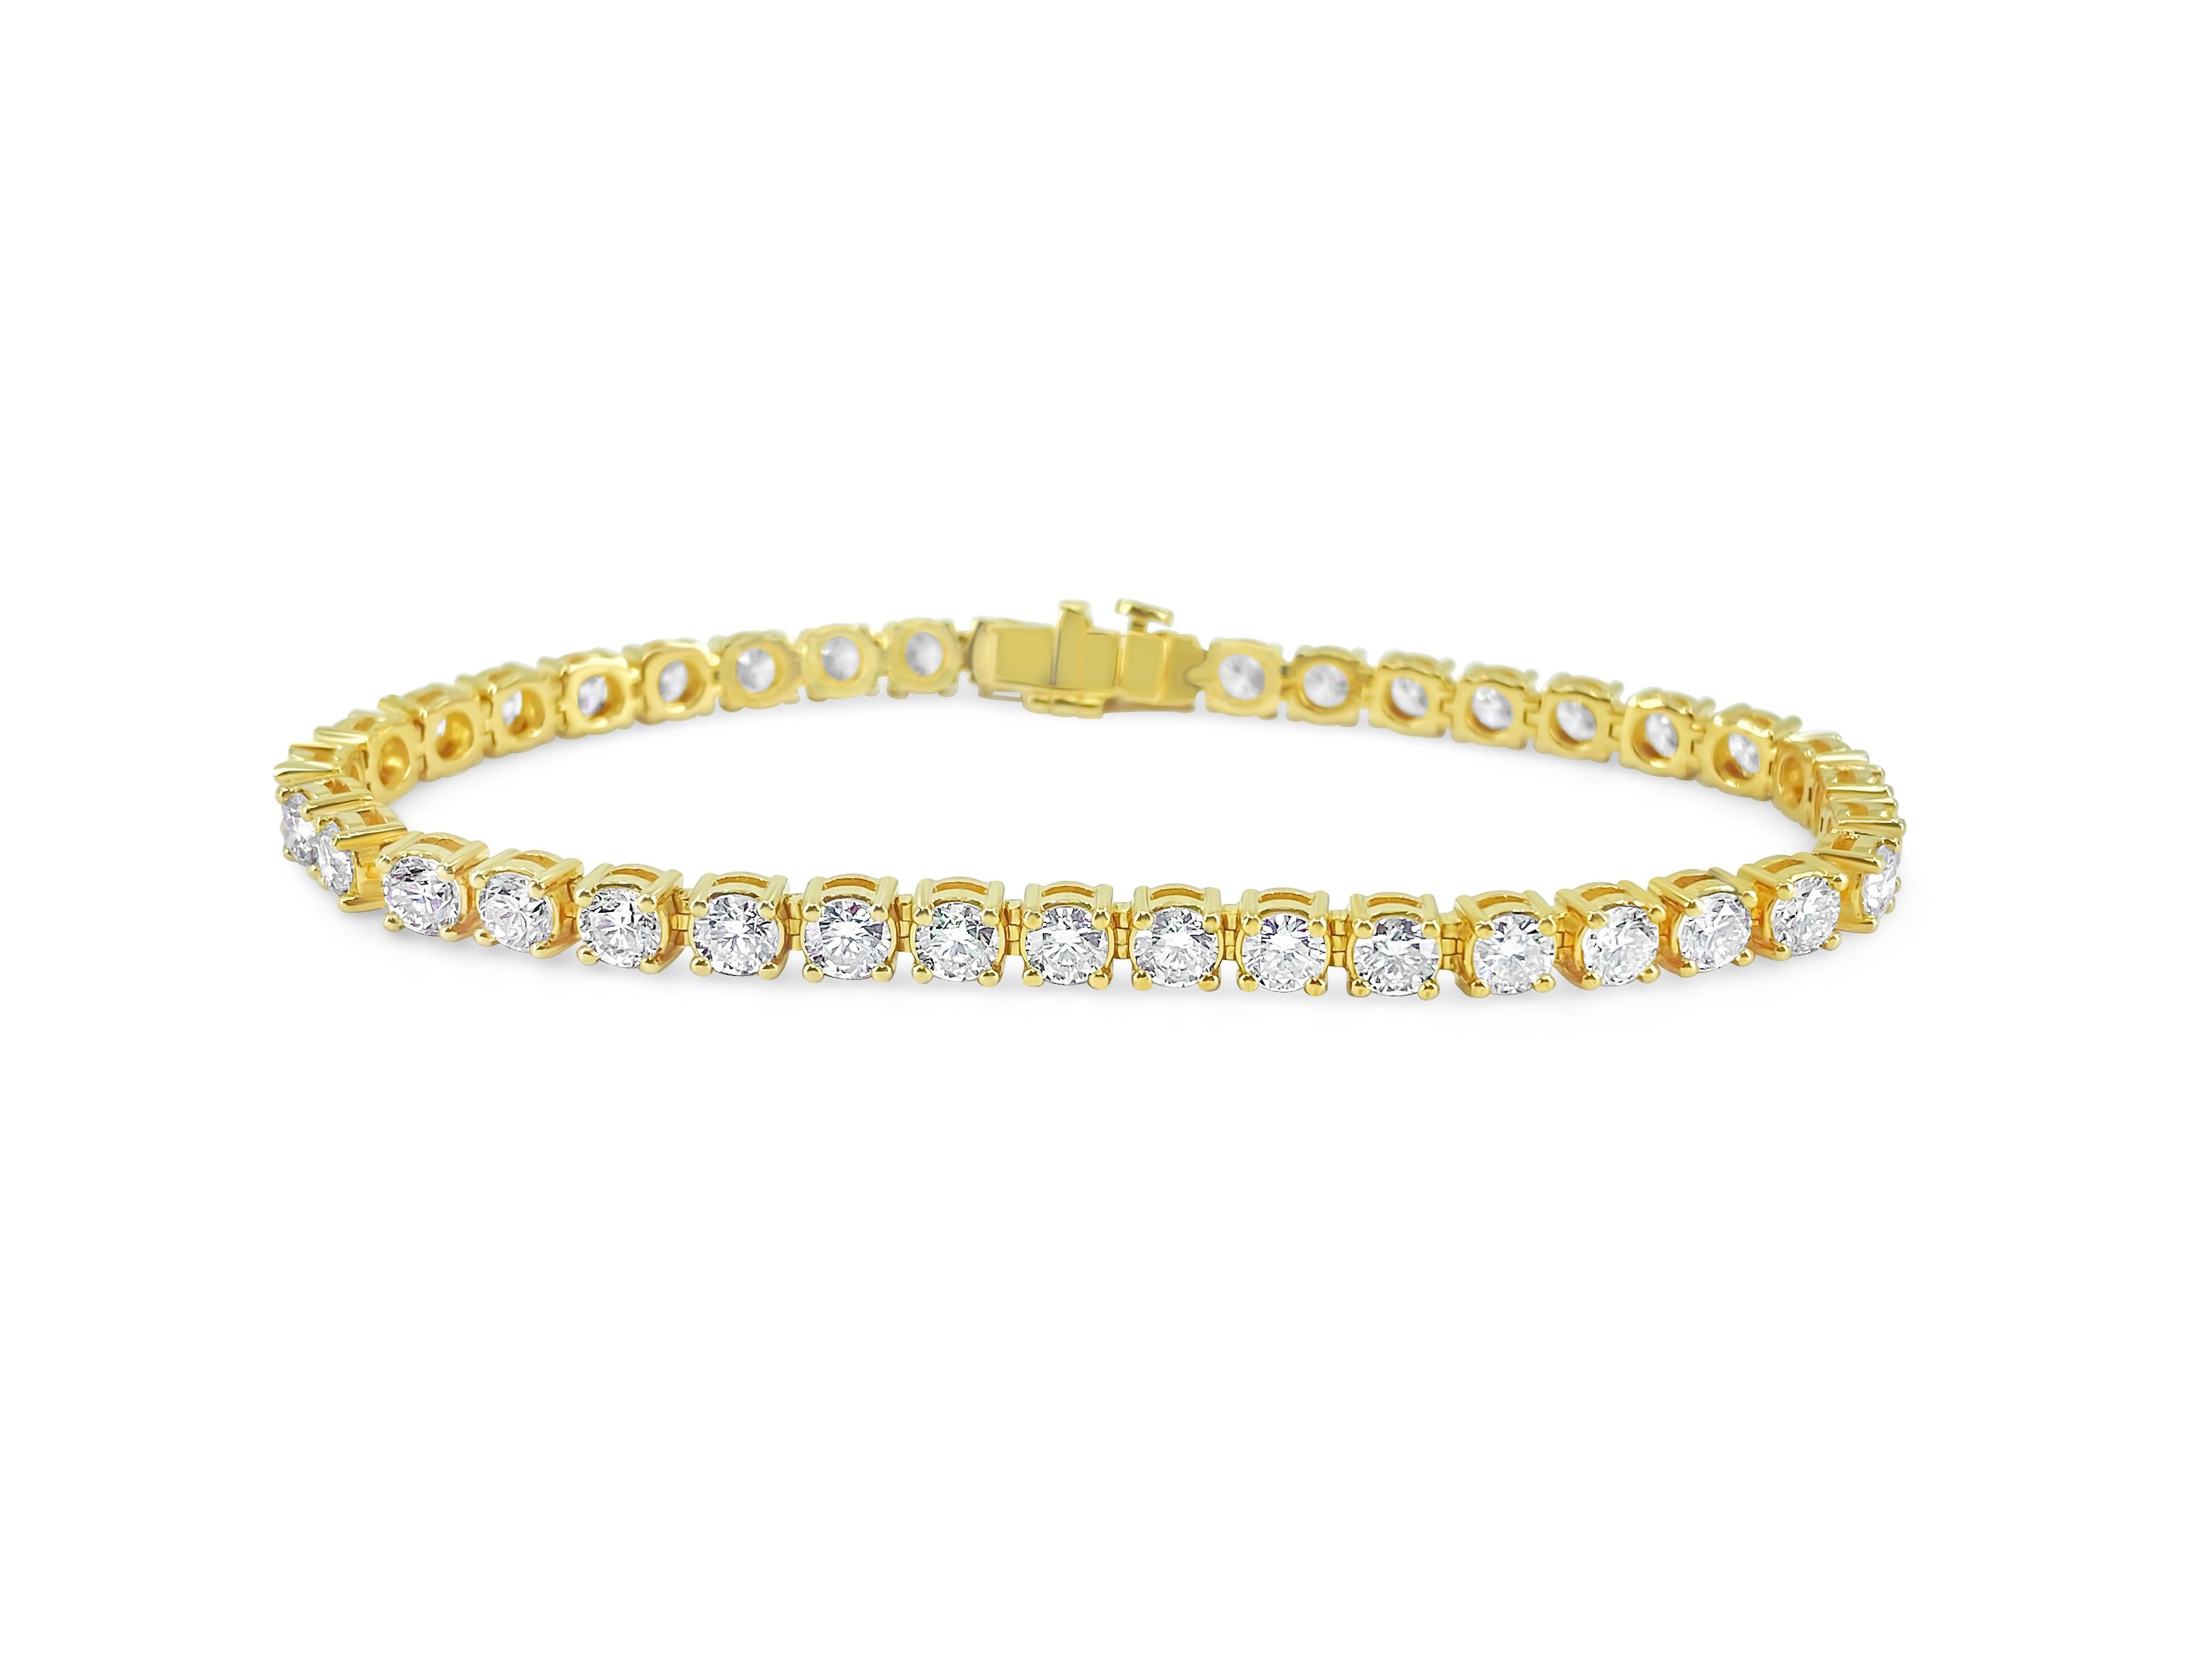 Elegance meets extravagance in this stunning 14k yellow gold diamond tennis bracelet, featuring 12.33 carats of dazzling round brilliant cut diamonds with VS clarity and G color. A masterpiece of natural earth-mined diamonds, this beautiful unisex